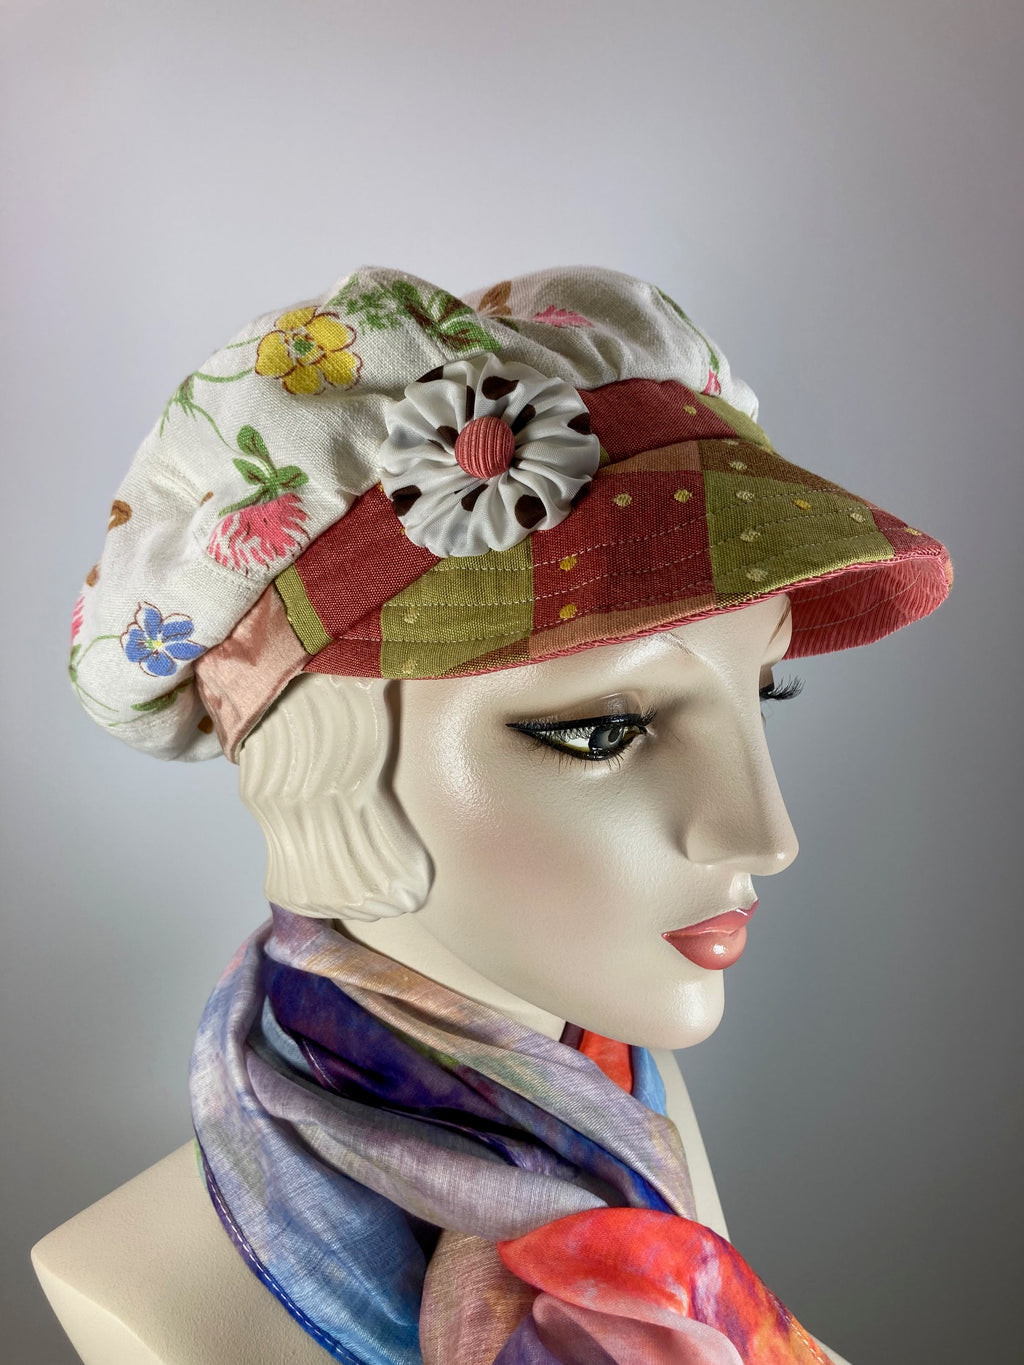 Womens recycled vintage tablecloth newsboy hat. Ladies travel newsboy cap. One of a kind paperboy hat. Sustainable fabric Apple hat.